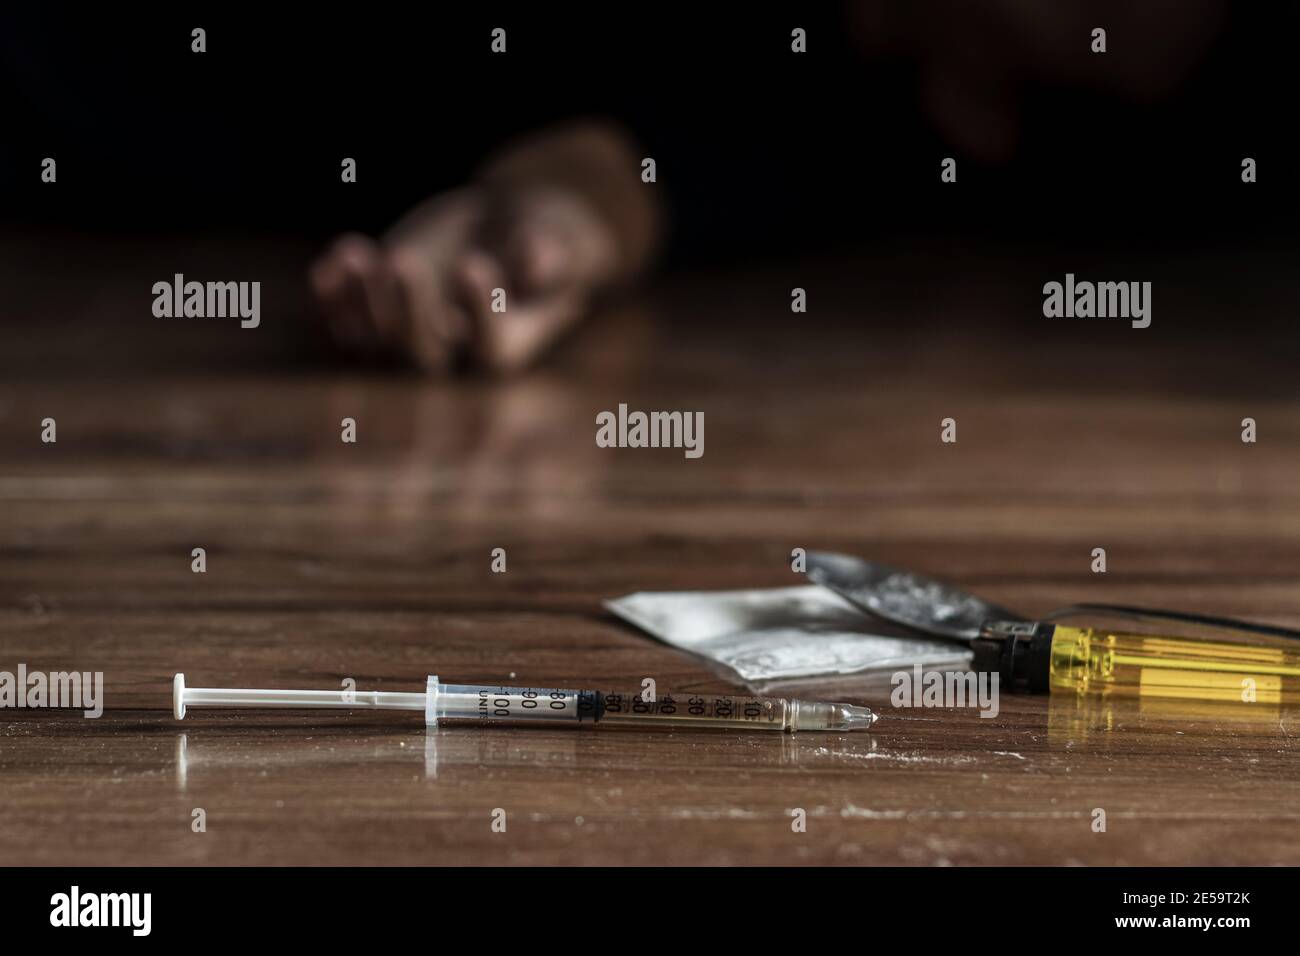 drug addict , junkie problem concept. close up of drug syringe and cooked heroin on the floor with drug addict hand reach out from black background Stock Photo